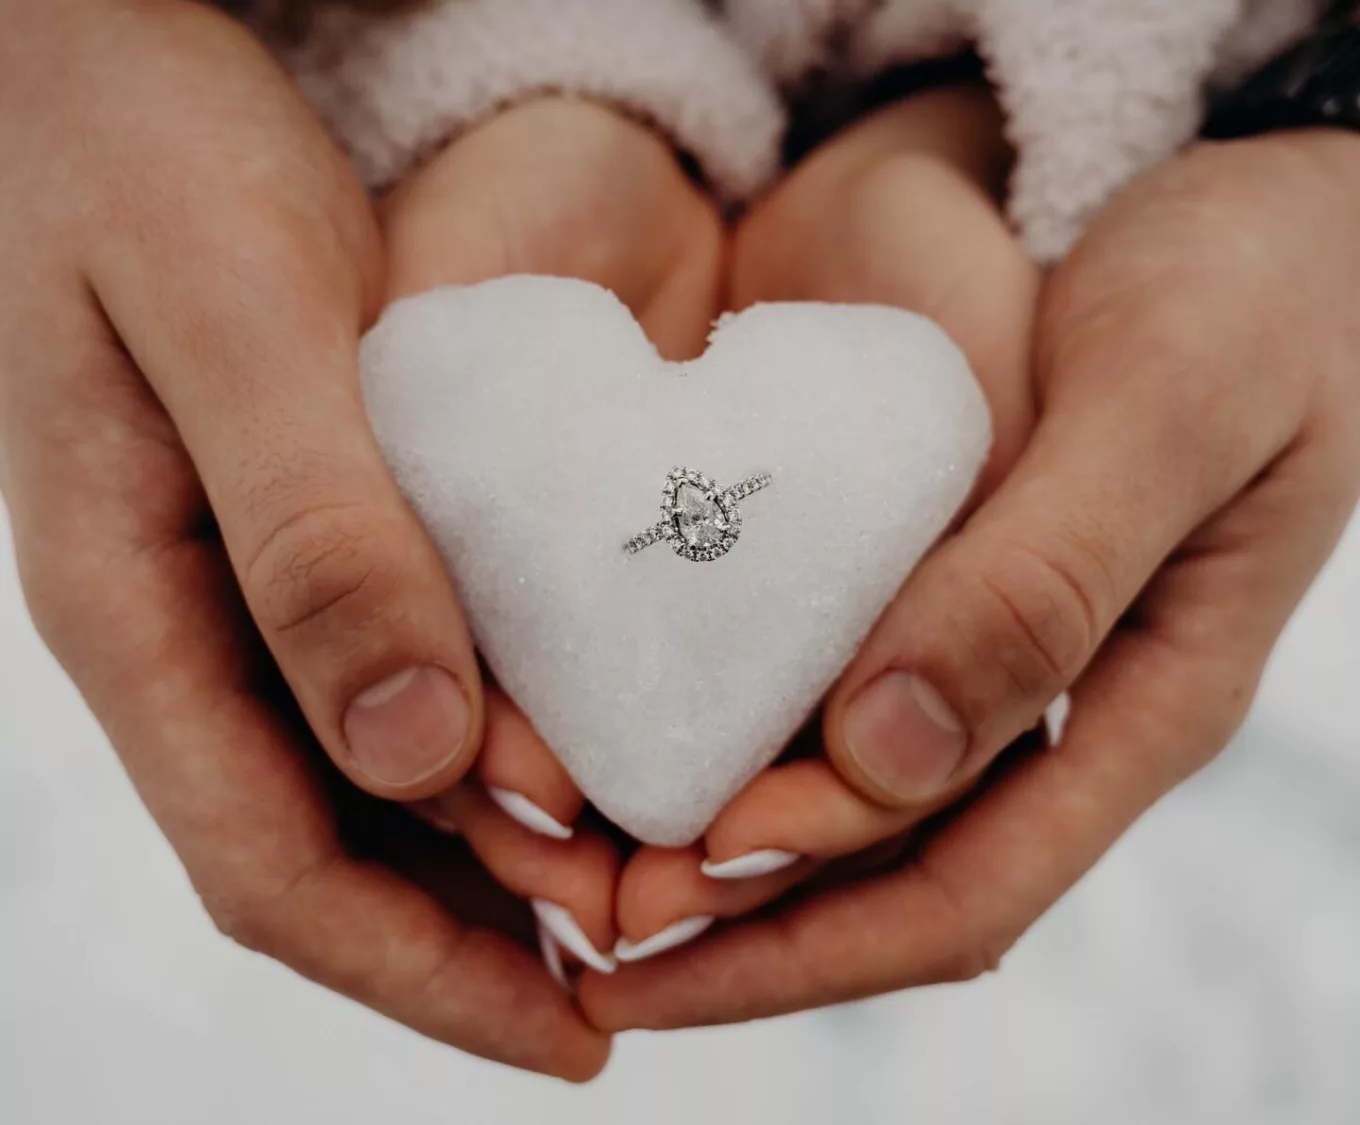 Snowball shaped into a heart with an engagement ring placed in the middle. Proposal Idea @irinachka